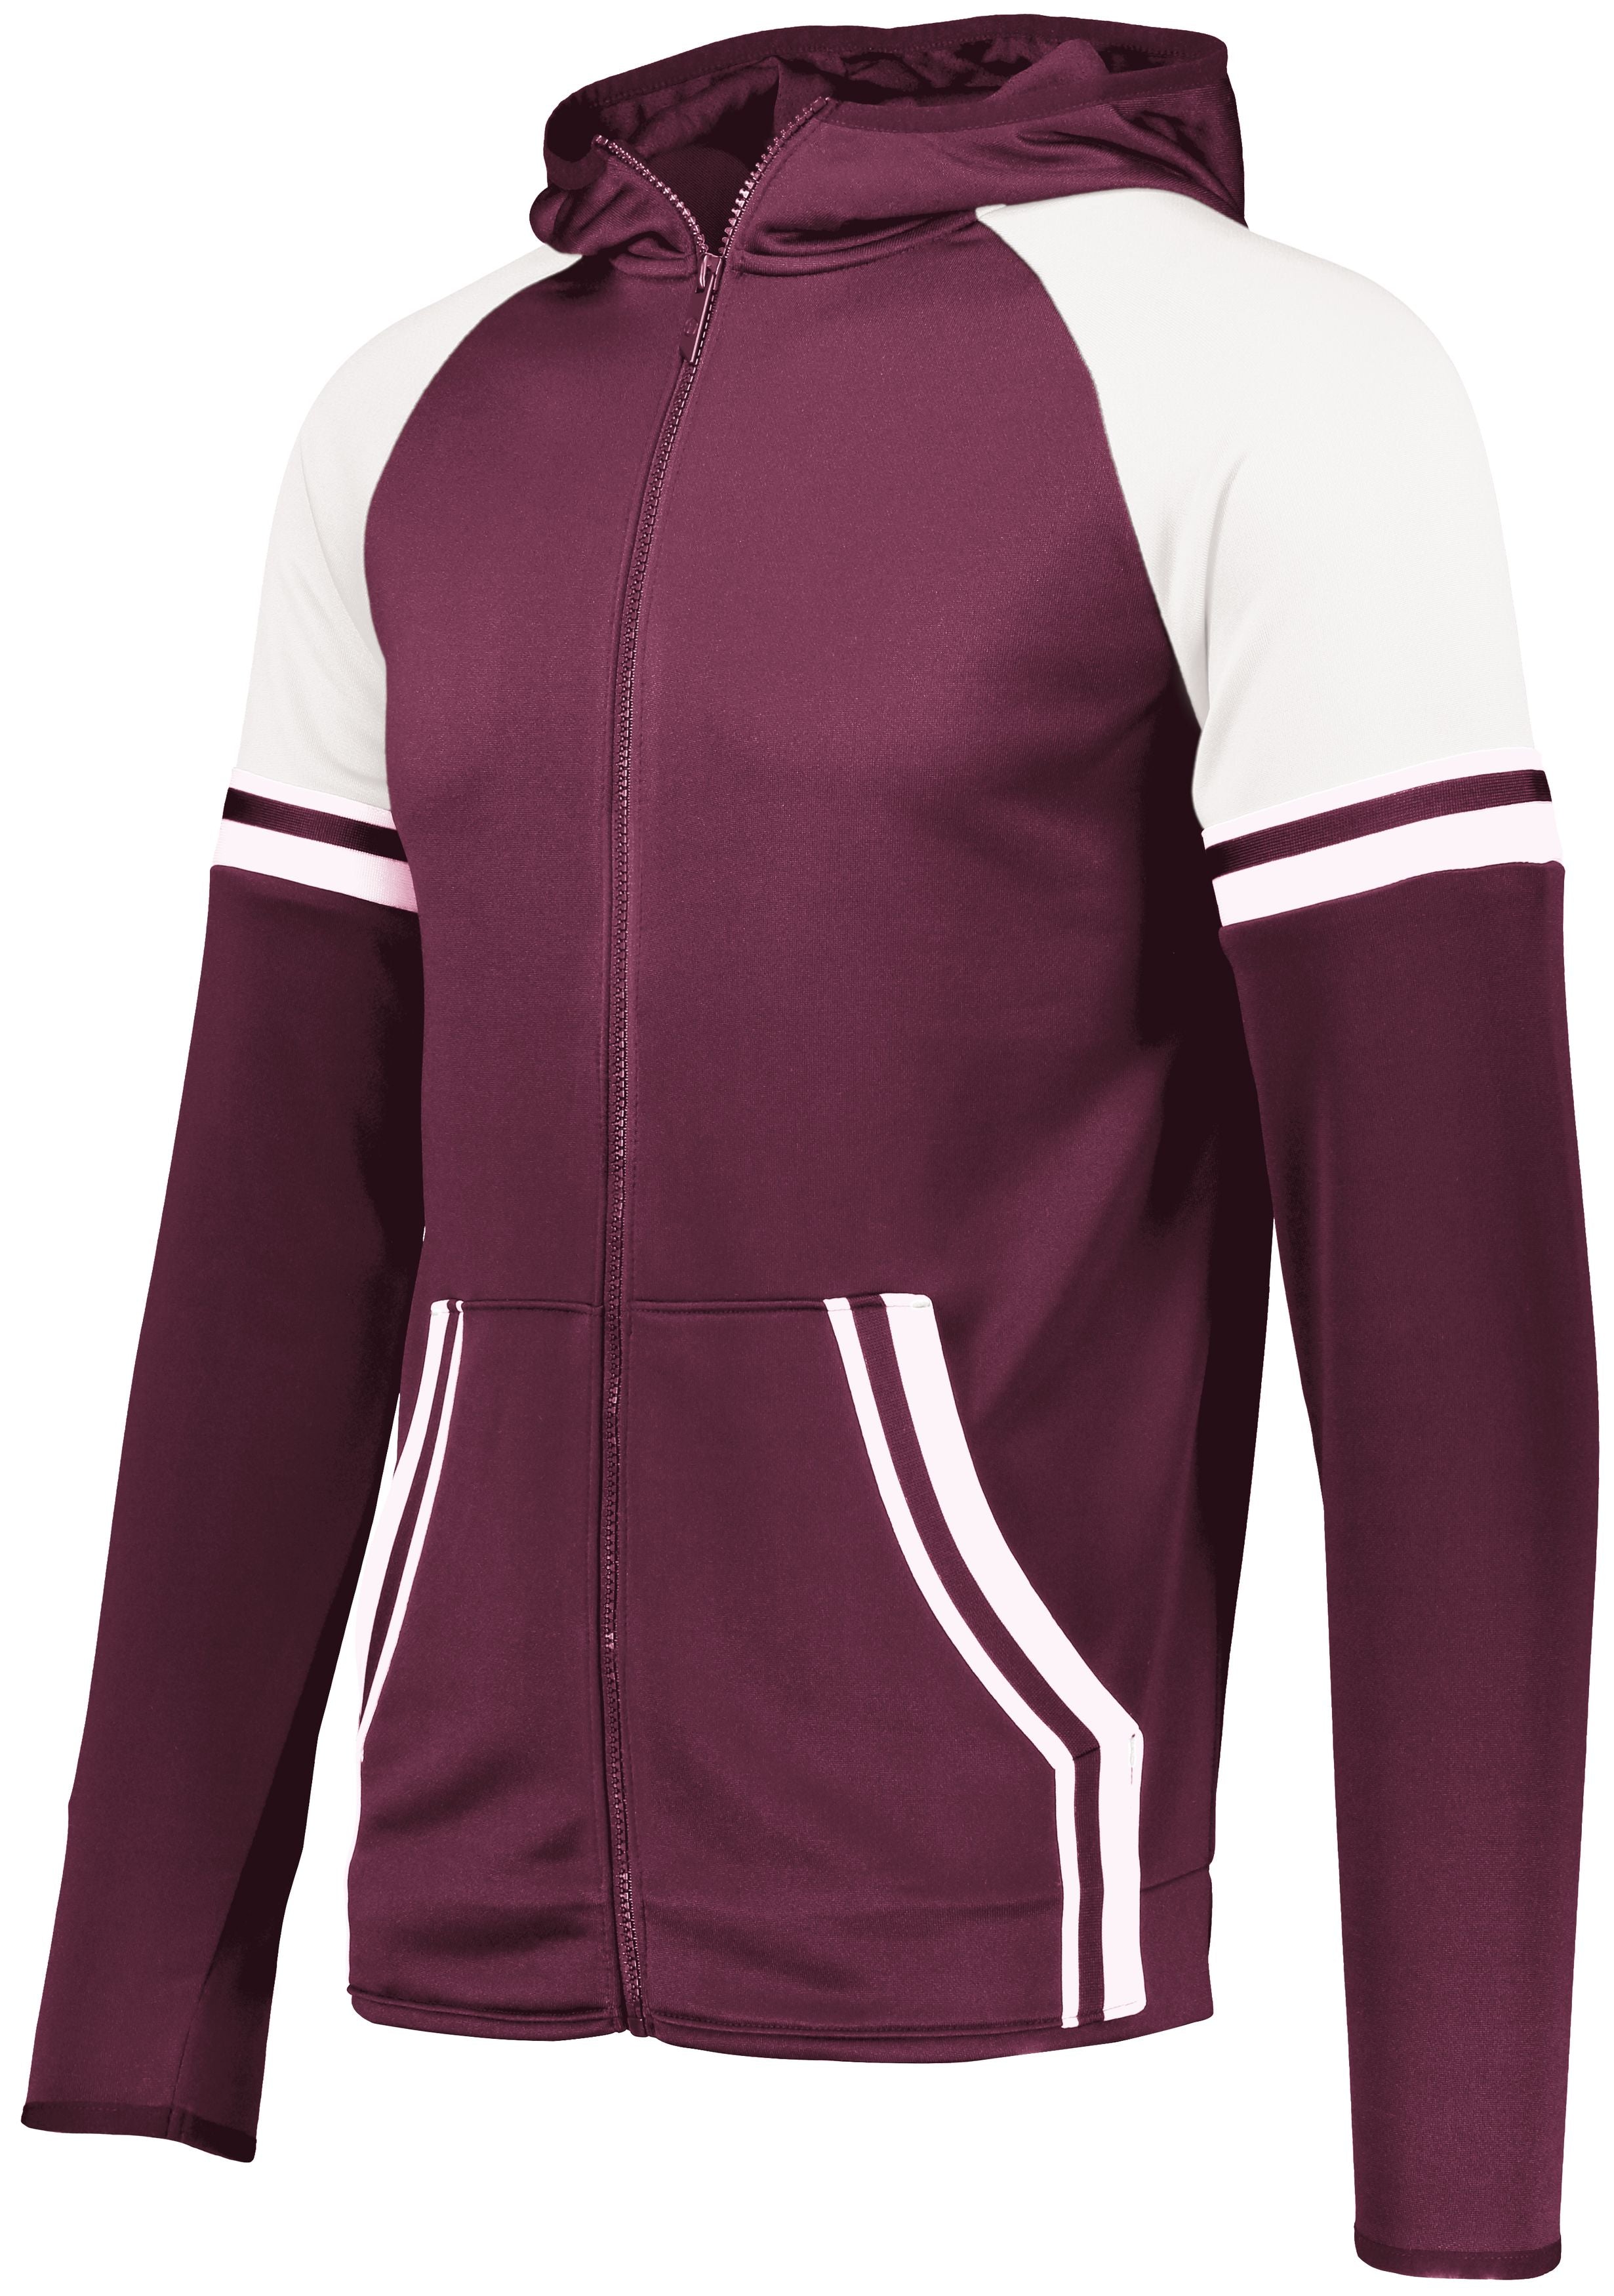 Holloway Retro Grade Jacket in Maroon/White  -Part of the Adult, Adult-Jacket, Holloway, Outerwear product lines at KanaleyCreations.com